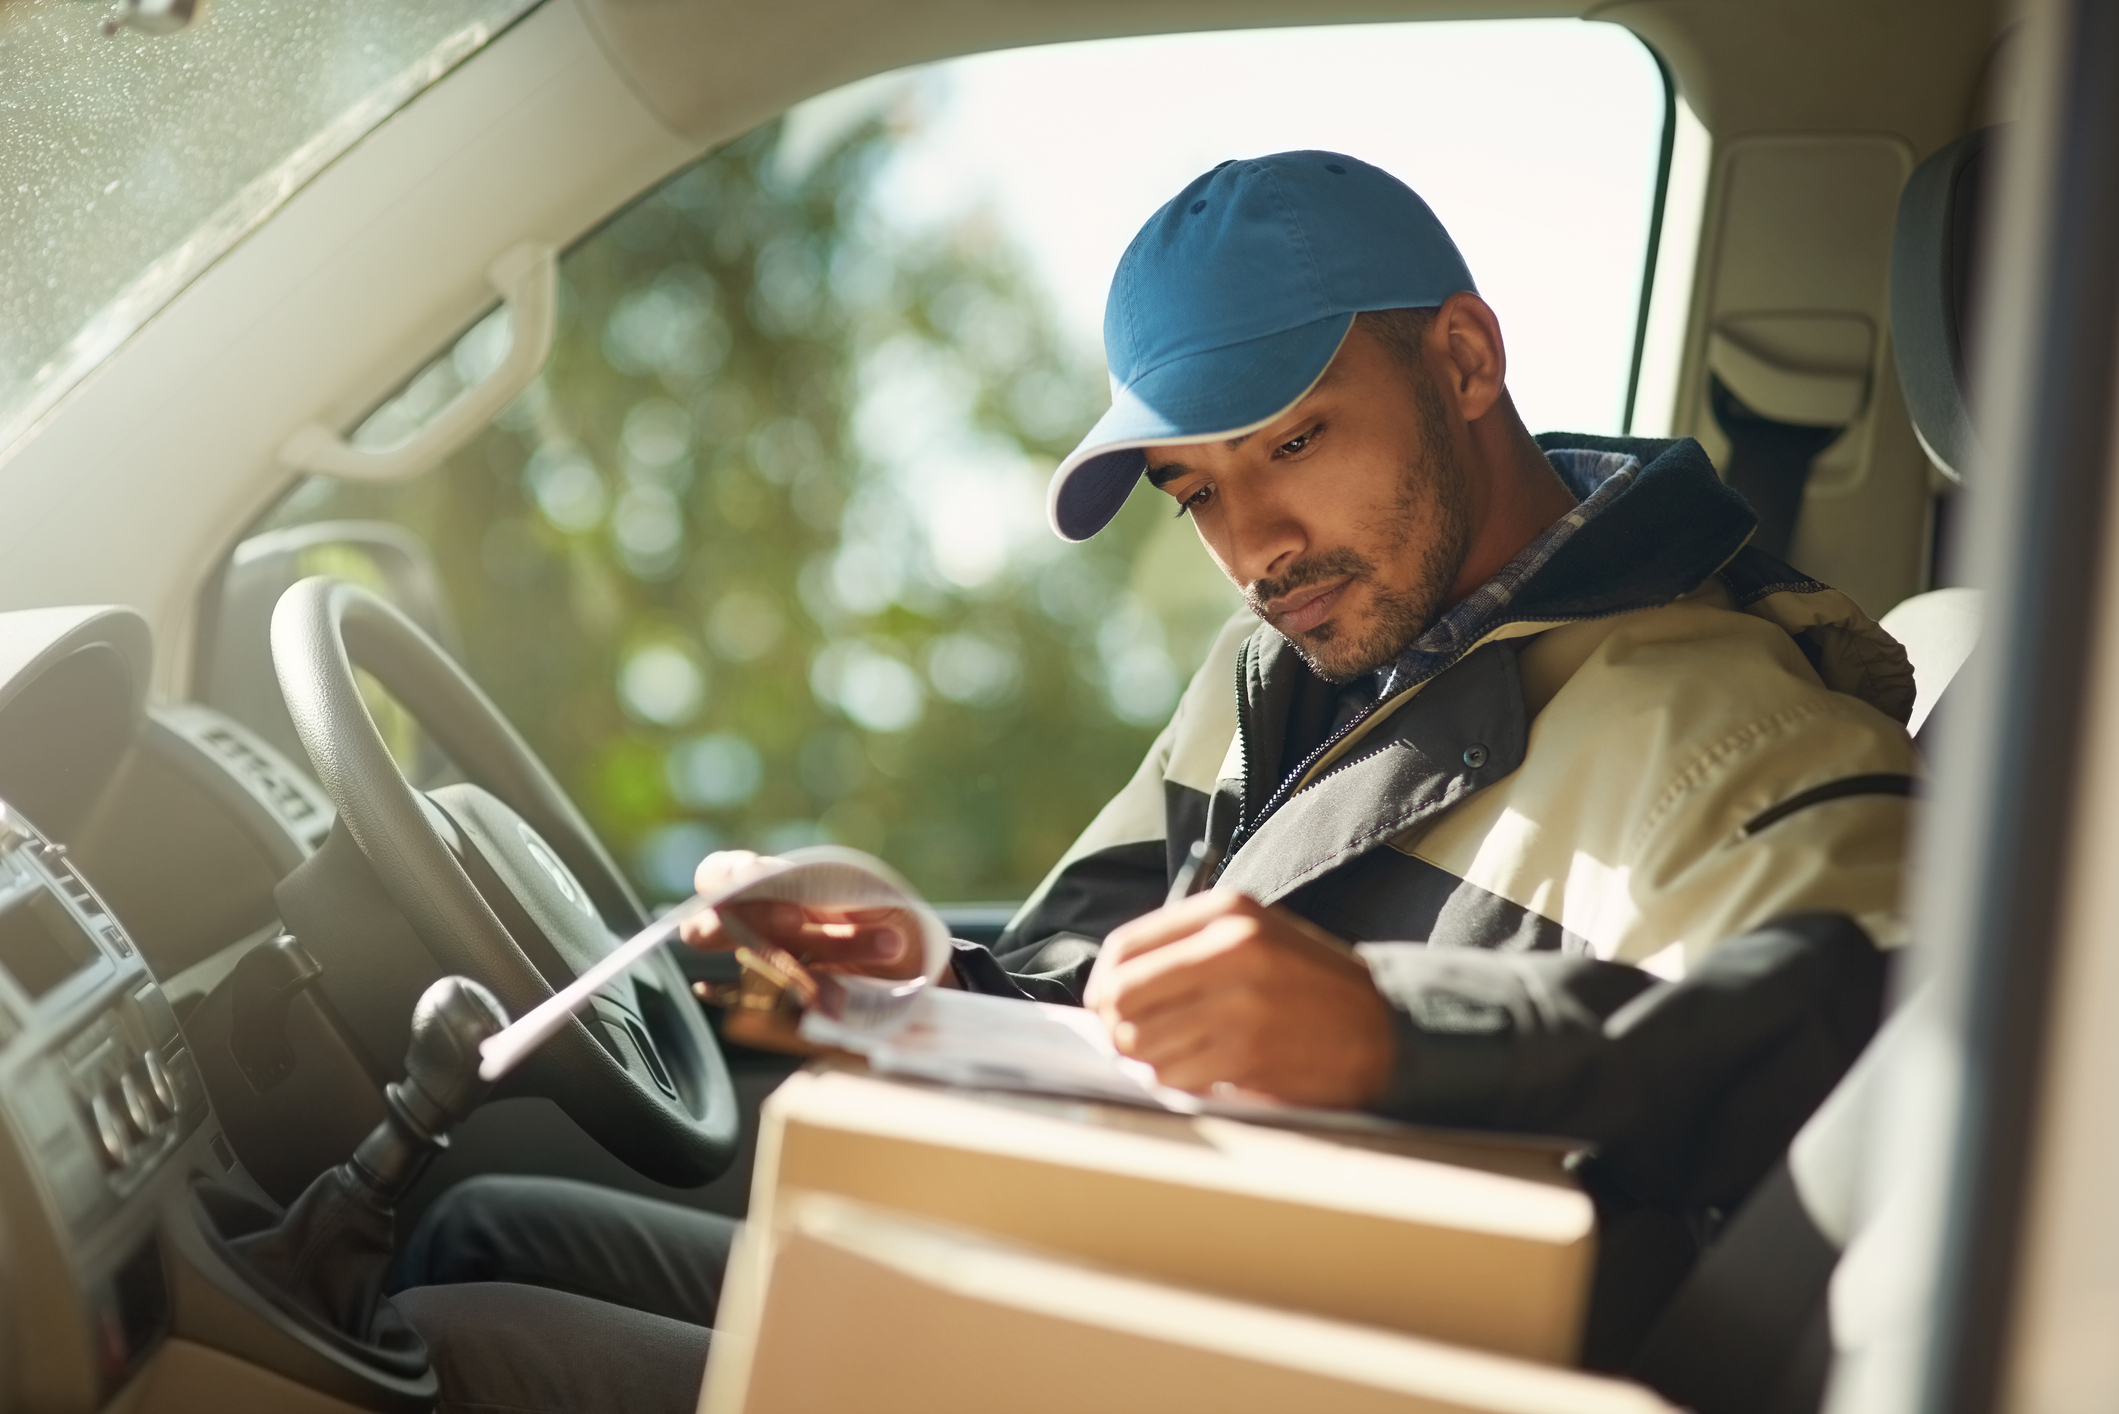 Professional Courier Services in Hialeah